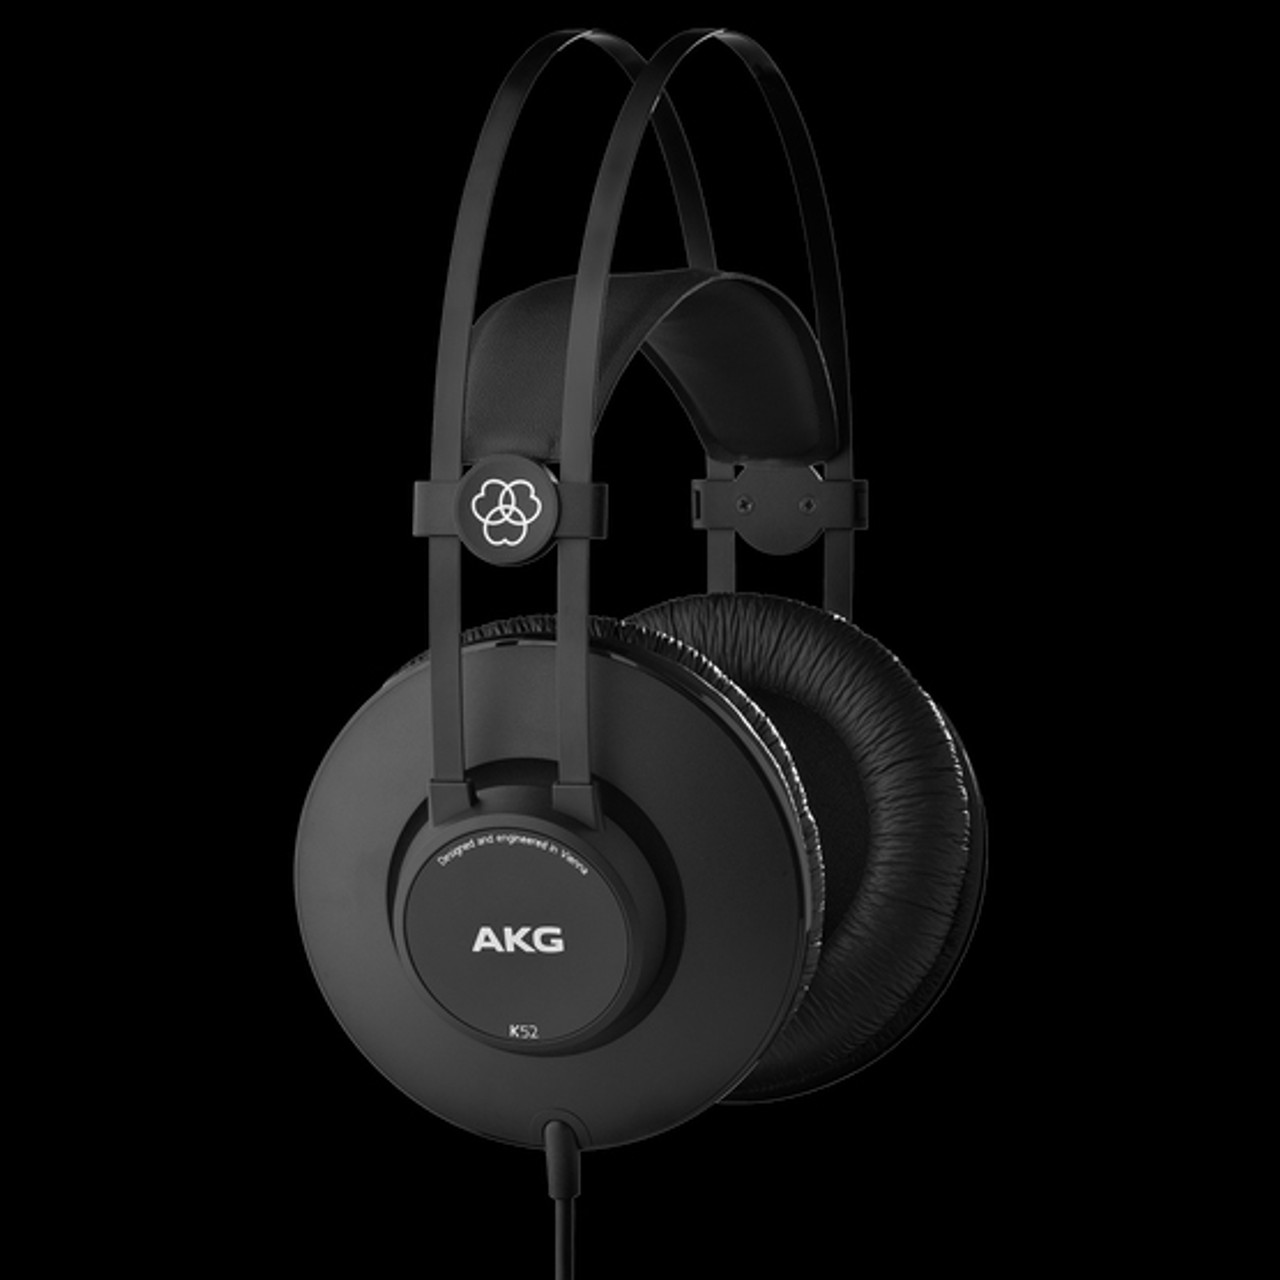 AKG K52  Product Overview 